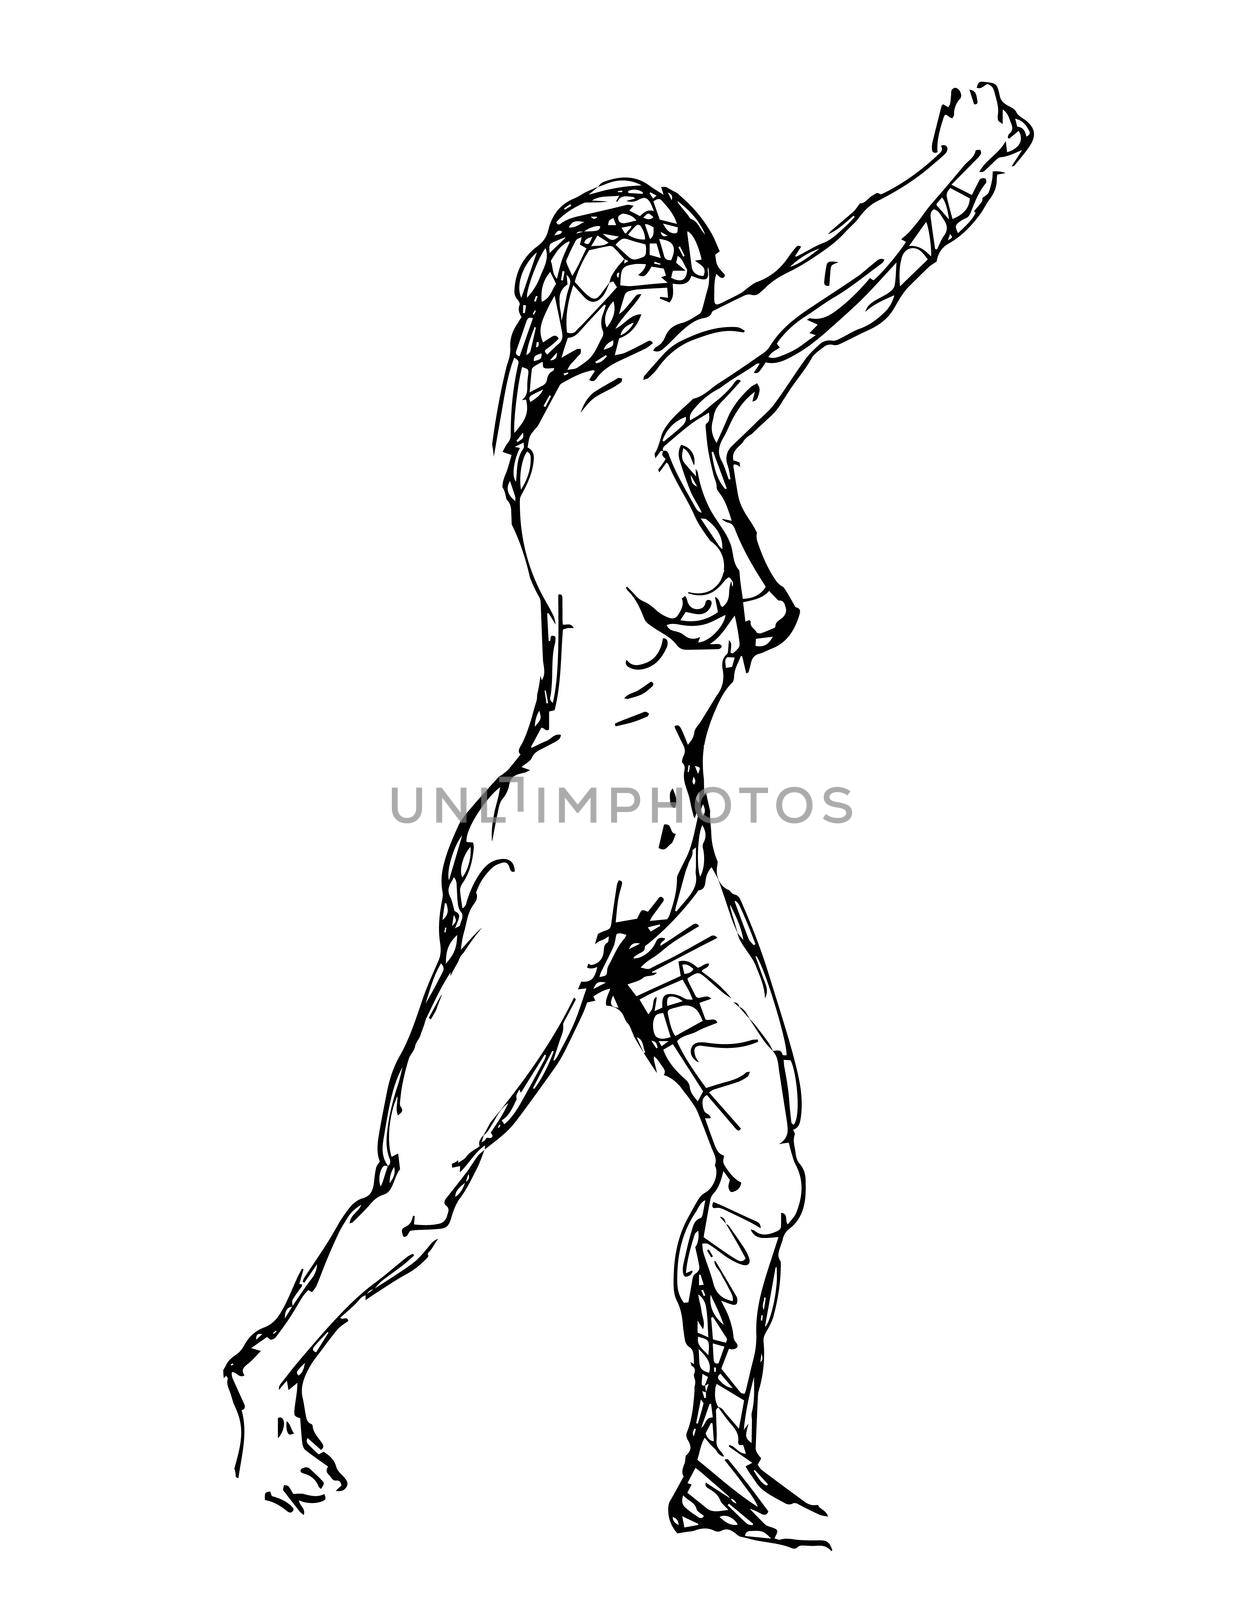 Nude Female Human Figure Striding With Hands Clasp Pointing Up Side View Doodle Art Line  by patrimonio